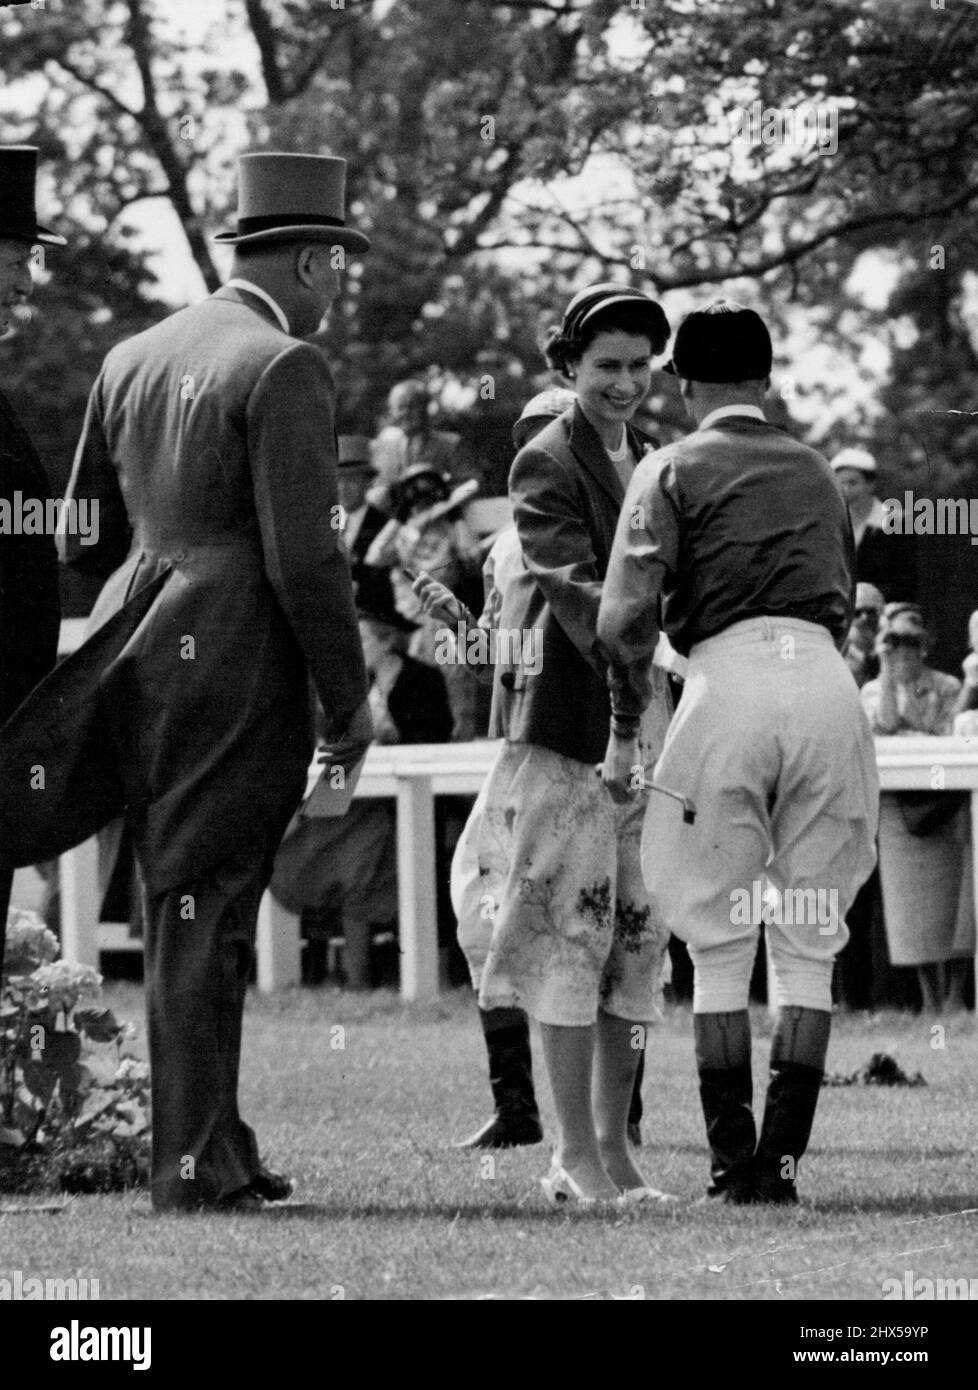 Queen's Handshake For Royal Jockey -- The Queen smilingly shakes hands with her jockey, W.H. Carr, in the paddock at Epsom, Surrey, to-day (Friday). Carr was about to ride the Queen's filly Angel Bright in the Oaks Stakes, the fillies' classic. She was unplaced in the race, which was won by the French entry Sun Cap. June 4, 1954. (Photo by Reuterphoto). Stock Photo